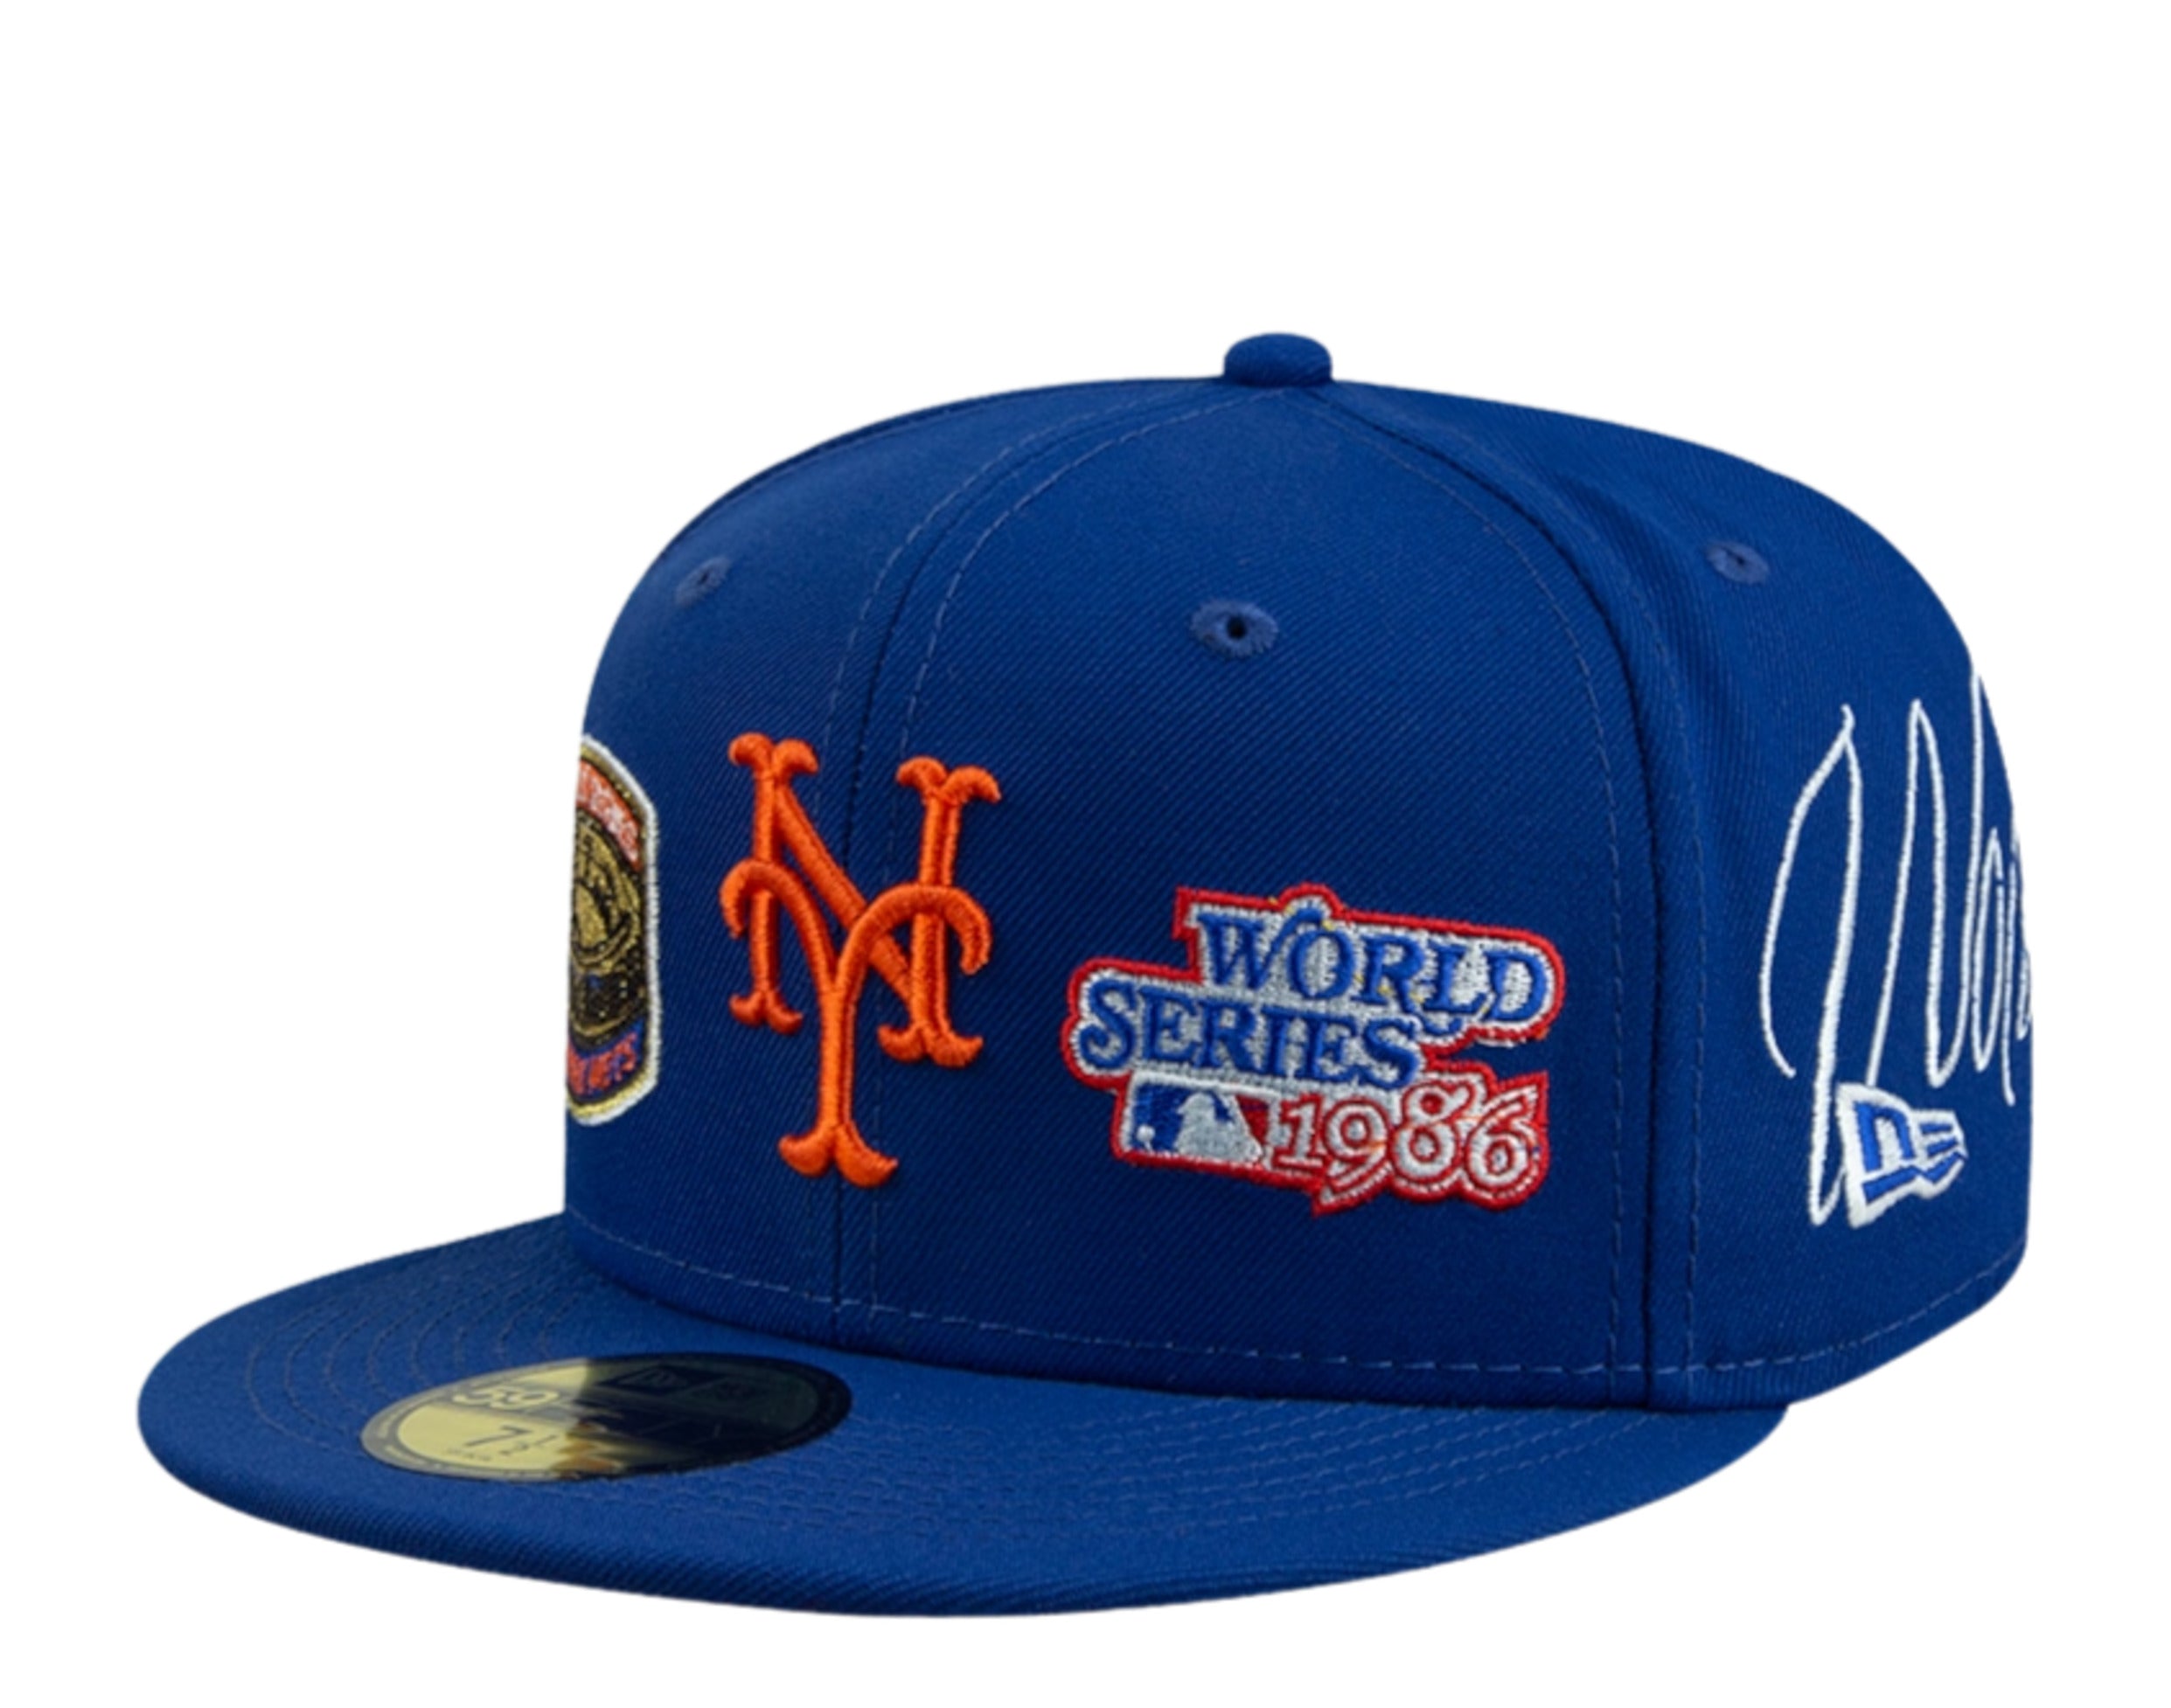 New York Mets HISTORIC CHAMPIONS Royal Fitted Hat by New Era